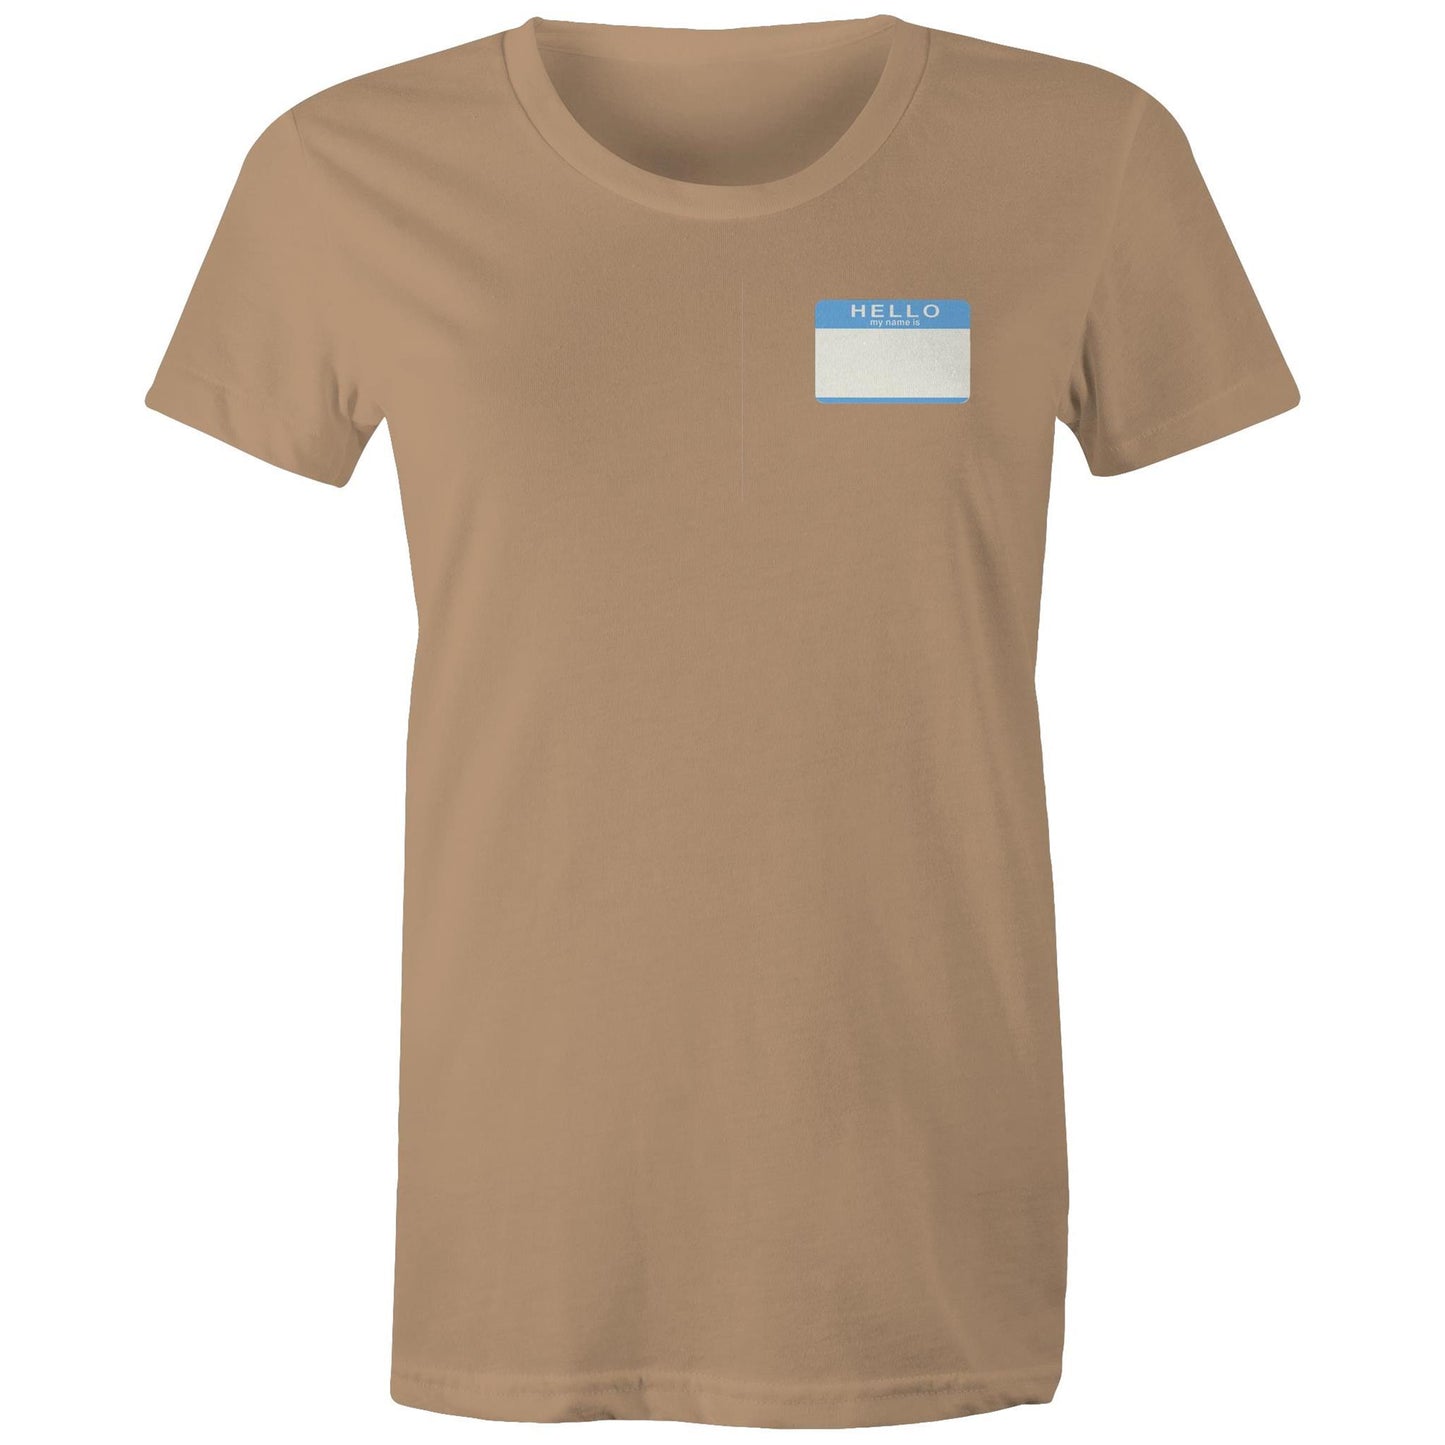 Name Badge T Shirts for Women